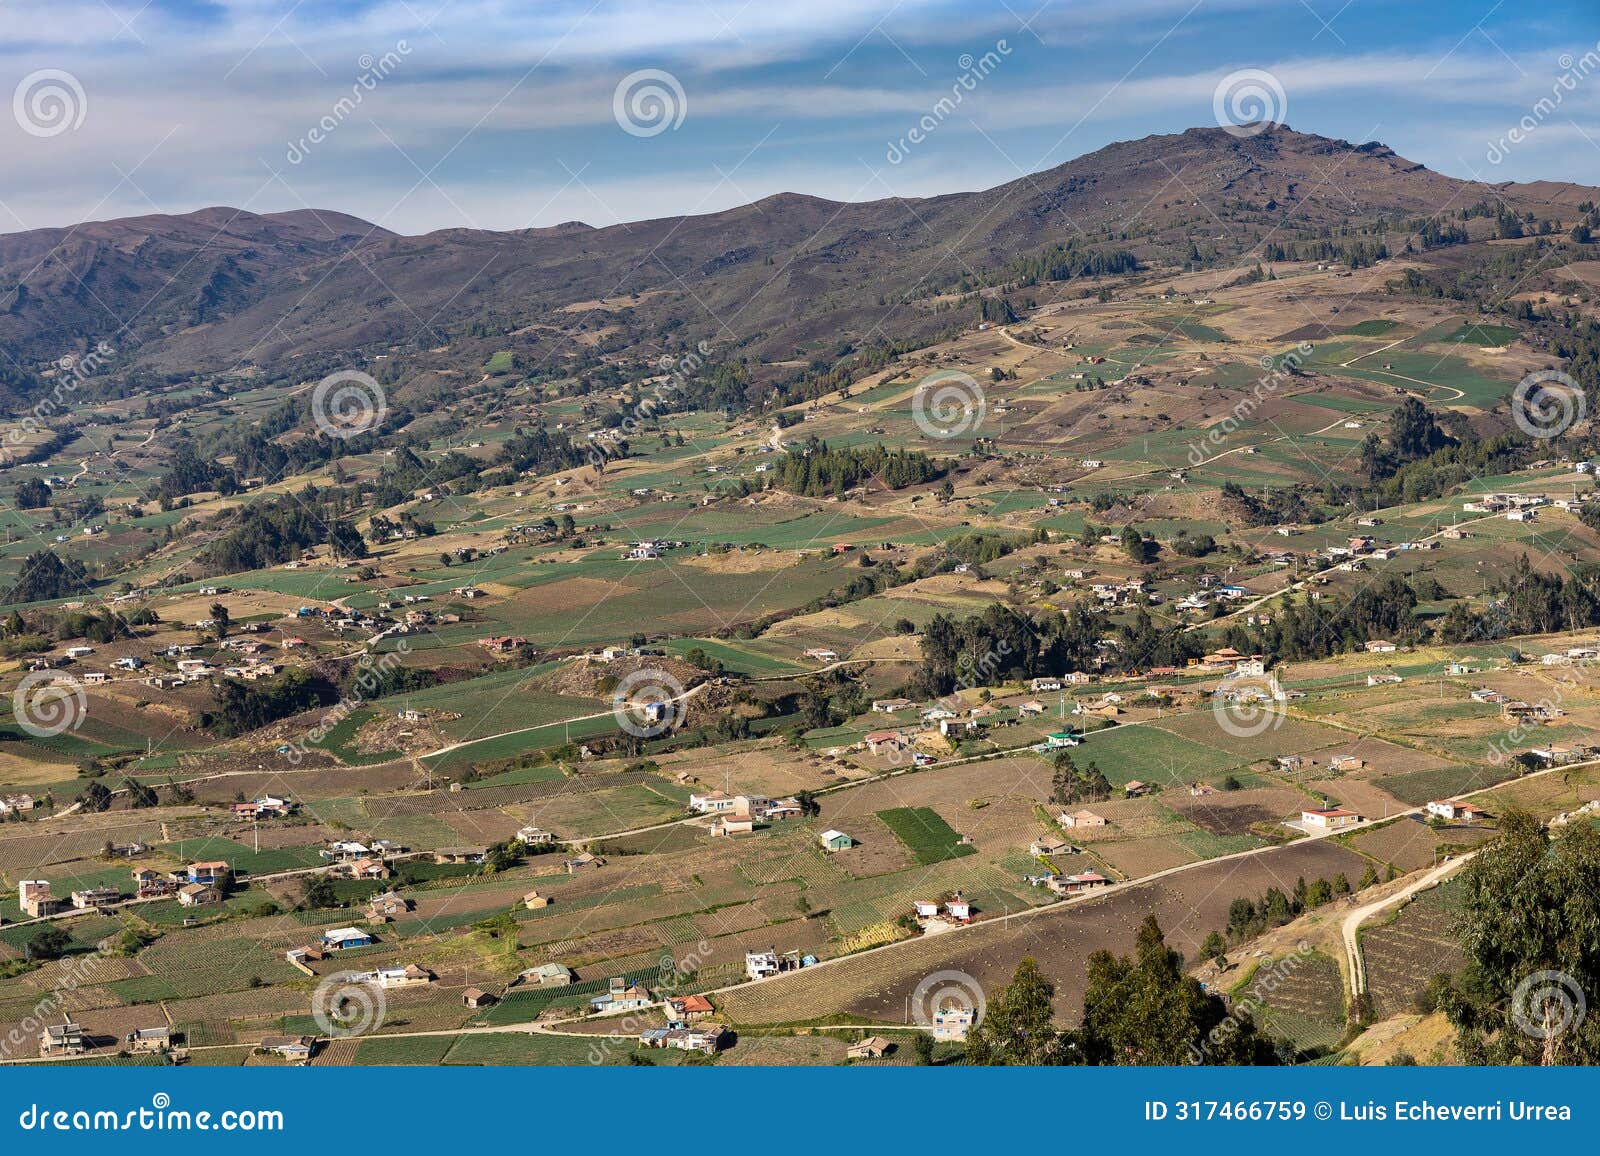 aquitania, boyaca - colombia. april 14, 2024. a colombian municipality located in the province of sugamuxi in the department